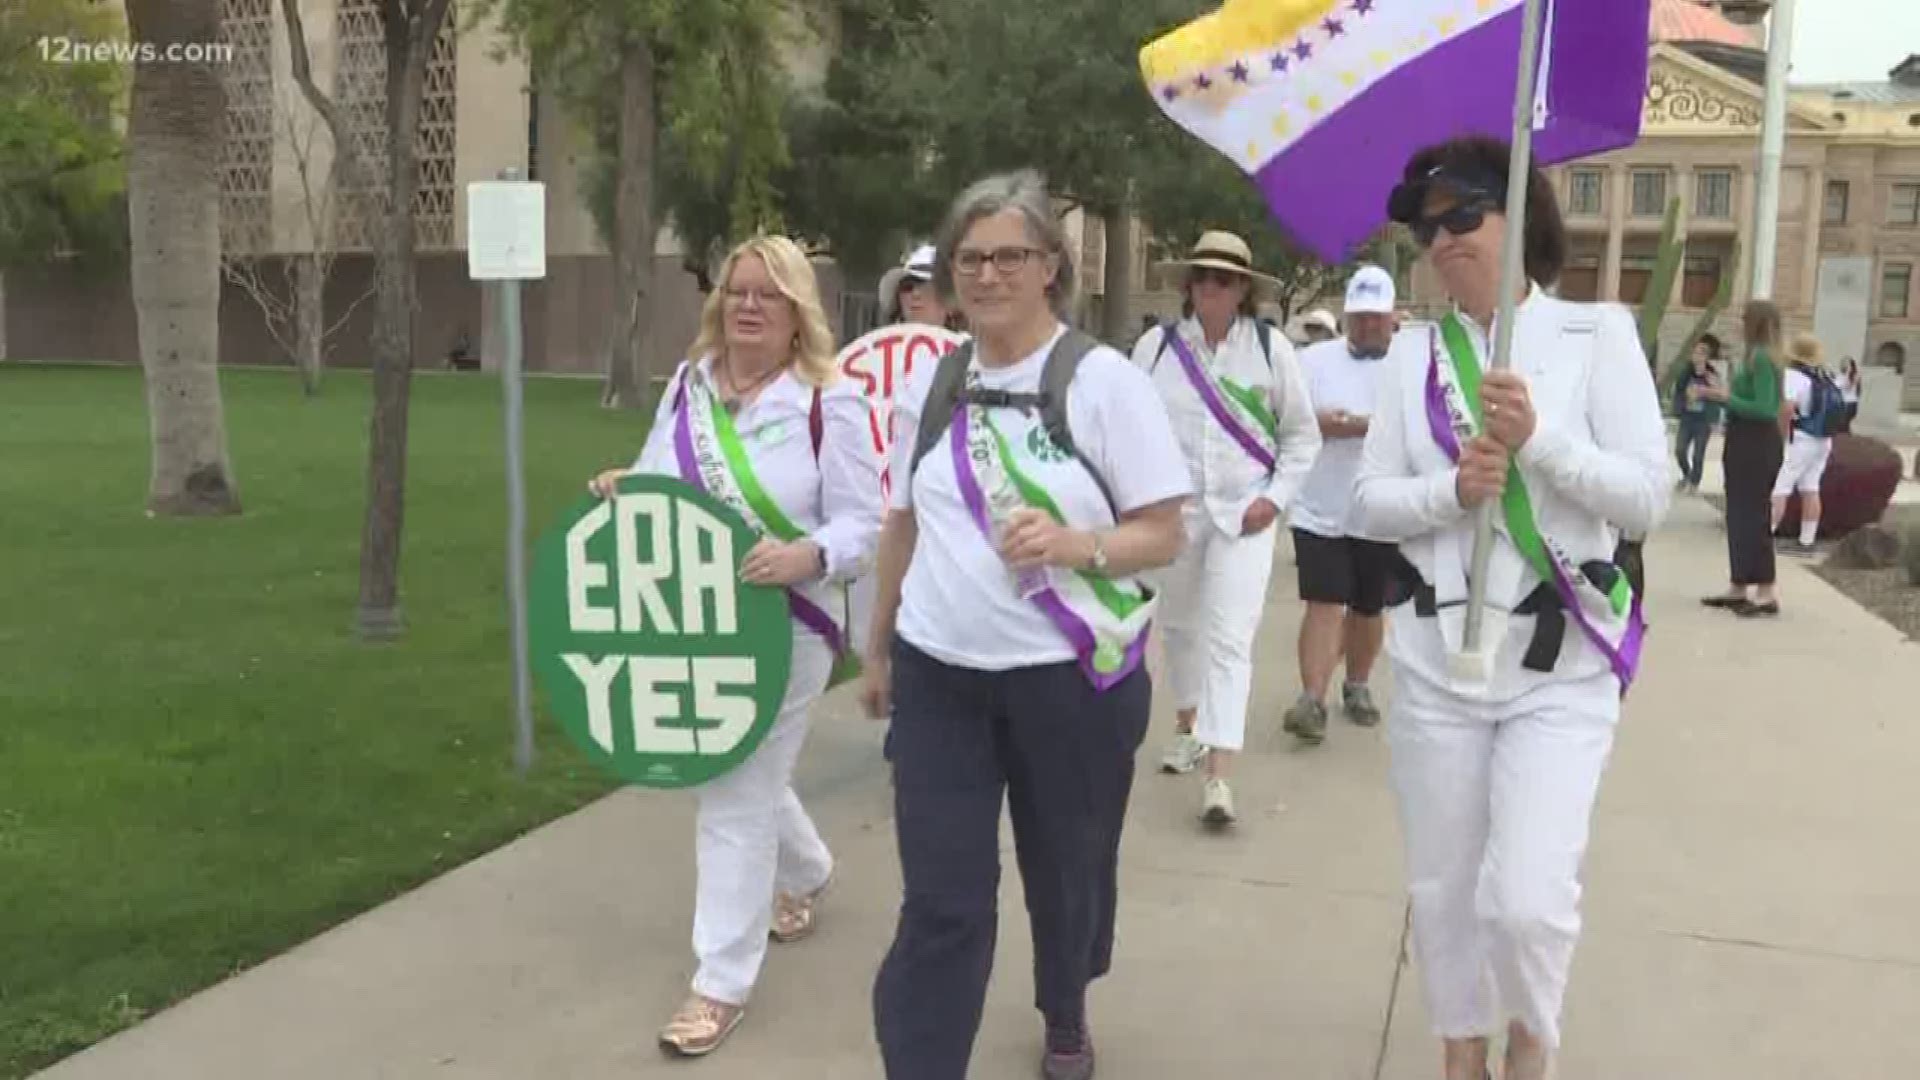 The push for equal rights for Americans regardless of sex continues 50 years after Congress passed the equal rights amendment. On Monday, supporters marched through Phoenix to urge Arizona legislators to make Arizona the 38th and final state to ratify the amendment to the constitution.